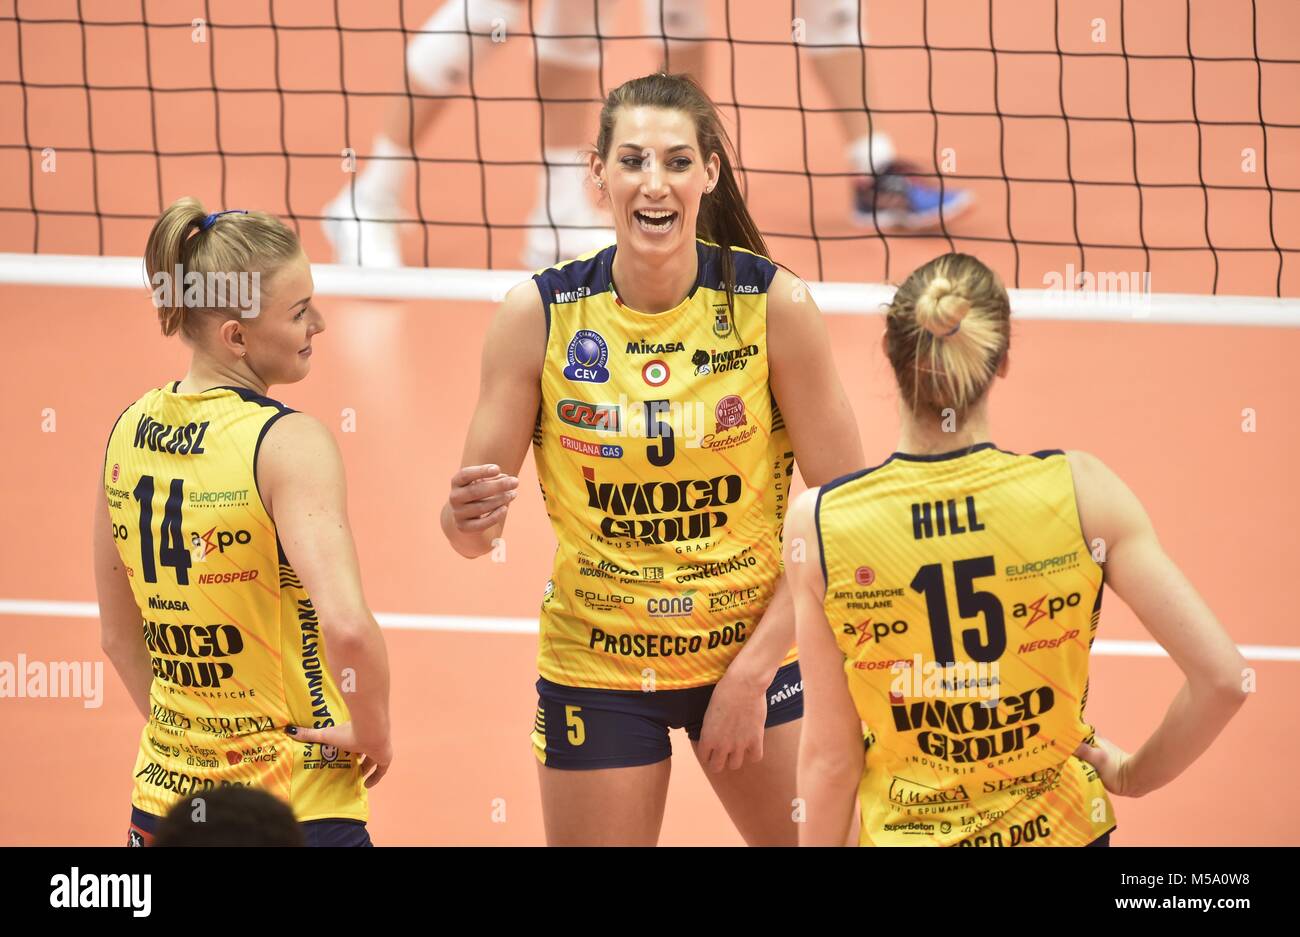 L-R Joanna Wolosz, Robin de Kruijf and Kimberly Hill (all Imoco) are seen during the VK Agel Prostejov (Czech Republic) vs Imoco Volley Conegliano (Italy) volleyball match of the Women's Volleyball Champions League in Prostejov, Czech Republic, on February 21, 2018. (CTK Photo/Ludek Perina) Stock Photo